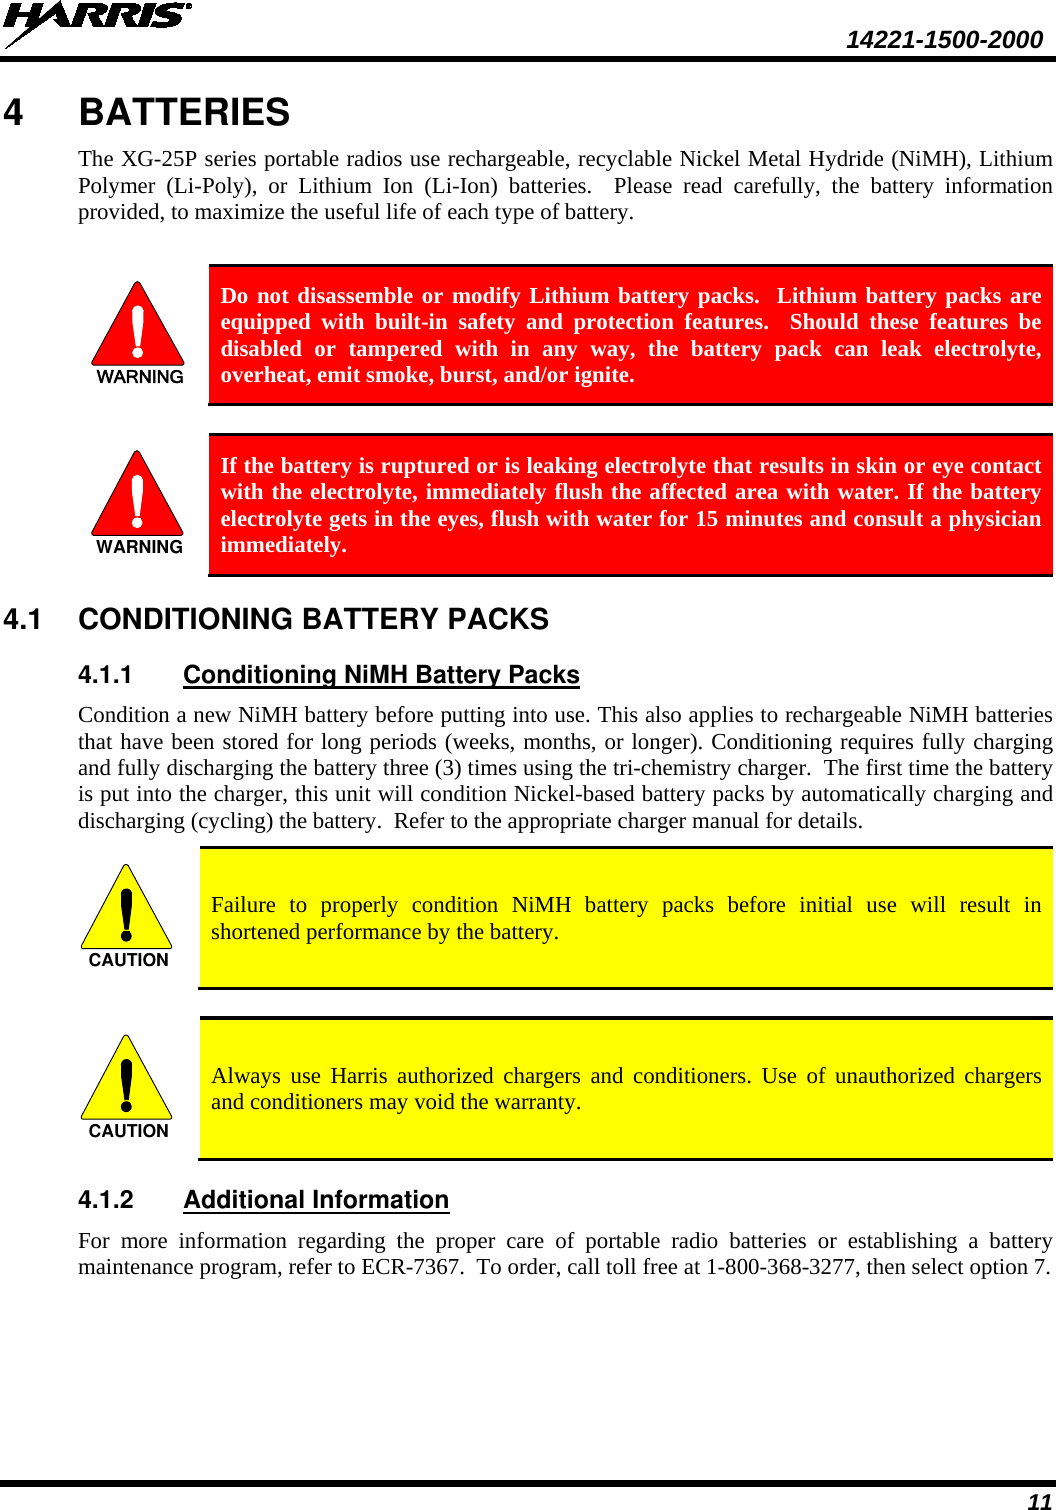  14221-1500-2000 11 4  BATTERIES The XG-25P series portable radios use rechargeable, recyclable Nickel Metal Hydride (NiMH), Lithium Polymer (Li-Poly), or Lithium Ion (Li-Ion) batteries.  Please read carefully, the battery information provided, to maximize the useful life of each type of battery.  WARNING Do not disassemble or modify Lithium battery packs.  Lithium battery packs are equipped with built-in safety and protection features.  Should these features be disabled or tampered with in any way, the battery pack can leak electrolyte, overheat, emit smoke, burst, and/or ignite.  WARNING If the battery is ruptured or is leaking electrolyte that results in skin or eye contact with the electrolyte, immediately flush the affected area with water. If the battery electrolyte gets in the eyes, flush with water for 15 minutes and consult a physician immediately. 4.1 CONDITIONING BATTERY PACKS 4.1.1 Conditioning NiMH Battery Packs Condition a new NiMH battery before putting into use. This also applies to rechargeable NiMH batteries that have been stored for long periods (weeks, months, or longer). Conditioning requires fully charging and fully discharging the battery three (3) times using the tri-chemistry charger.  The first time the battery is put into the charger, this unit will condition Nickel-based battery packs by automatically charging and discharging (cycling) the battery.  Refer to the appropriate charger manual for details. CAUTION Failure to properly condition NiMH battery packs before initial use will result in shortened performance by the battery.  CAUTION Always use Harris authorized chargers and conditioners. Use of unauthorized chargers and conditioners may void the warranty. 4.1.2 Additional Information For more information regarding the proper care of portable radio batteries or establishing a battery maintenance program, refer to ECR-7367.  To order, call toll free at 1-800-368-3277, then select option 7. 